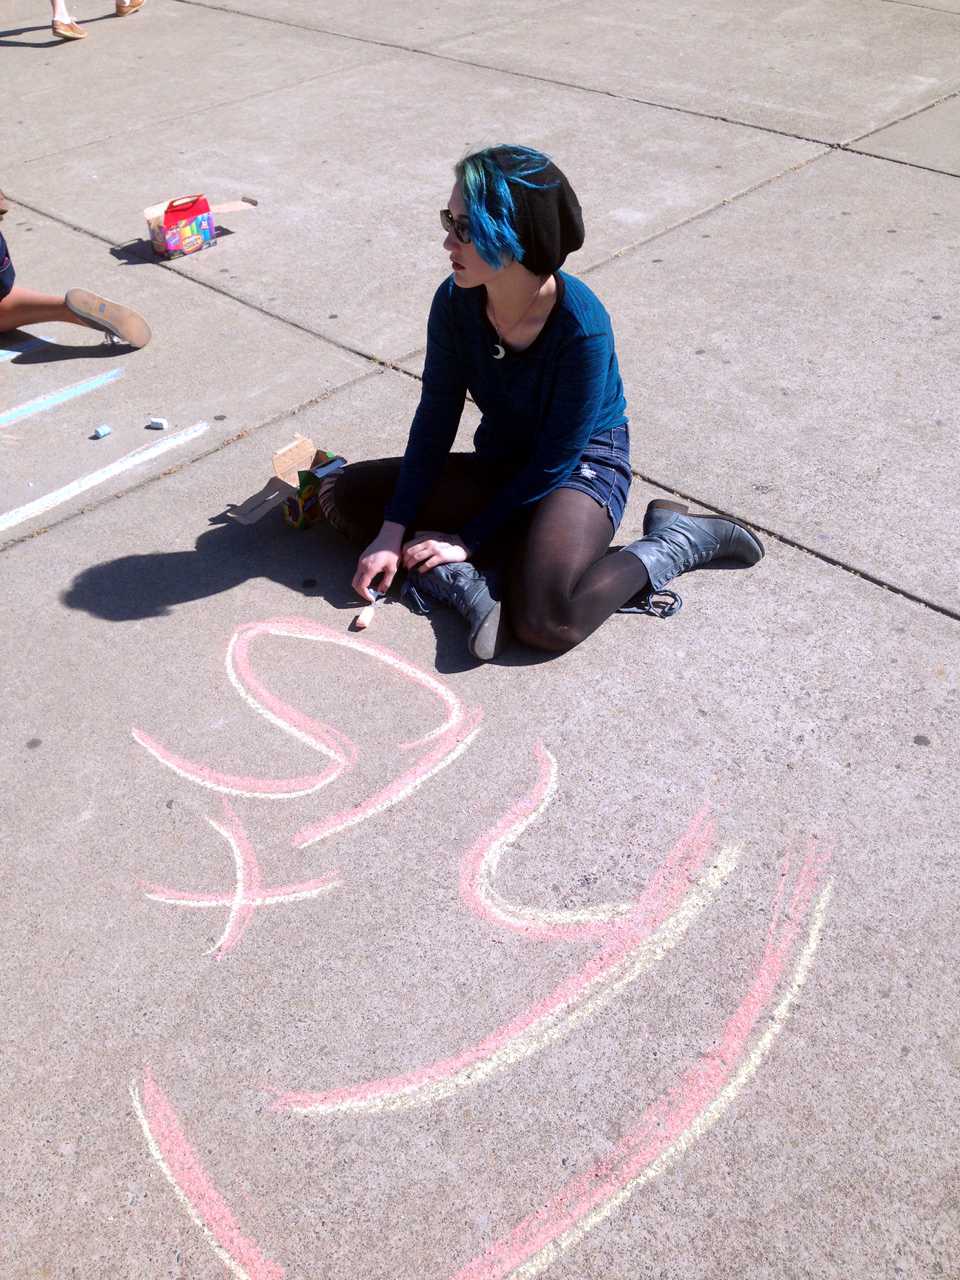 To announce the Day of Silence taking place on April 17, sophomore Megan Gallant writes information in the quad using chalk after school. The Day of Silence is a national student led event that illustrates the silencing effect of bullying. “Day of Silence has been going on here for at least 4 years. It’s been a way to bring awareness to the injustices done to the LGBT community.” GSA club co-vice president senior TJ Conway said. Photo by Kristen Goldman